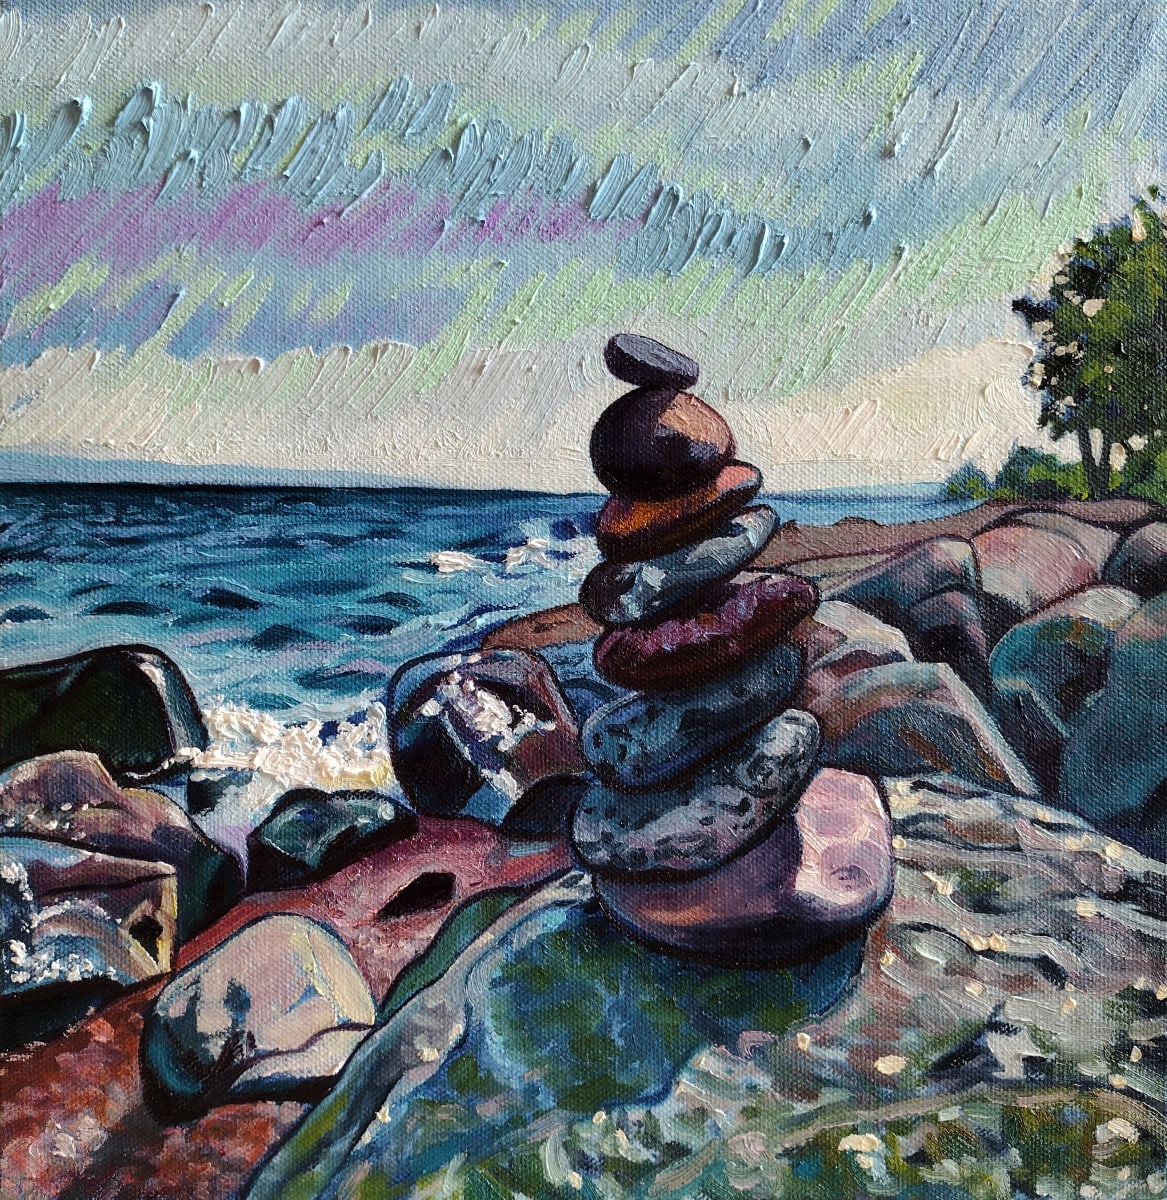 Finding My Way by Heather Friedli  Image: Superior shores awash in stones, reds, blues, greens, yellows. Solid foundations for cairn stones. One on top each other leads the way. Waves crashing in the distance.